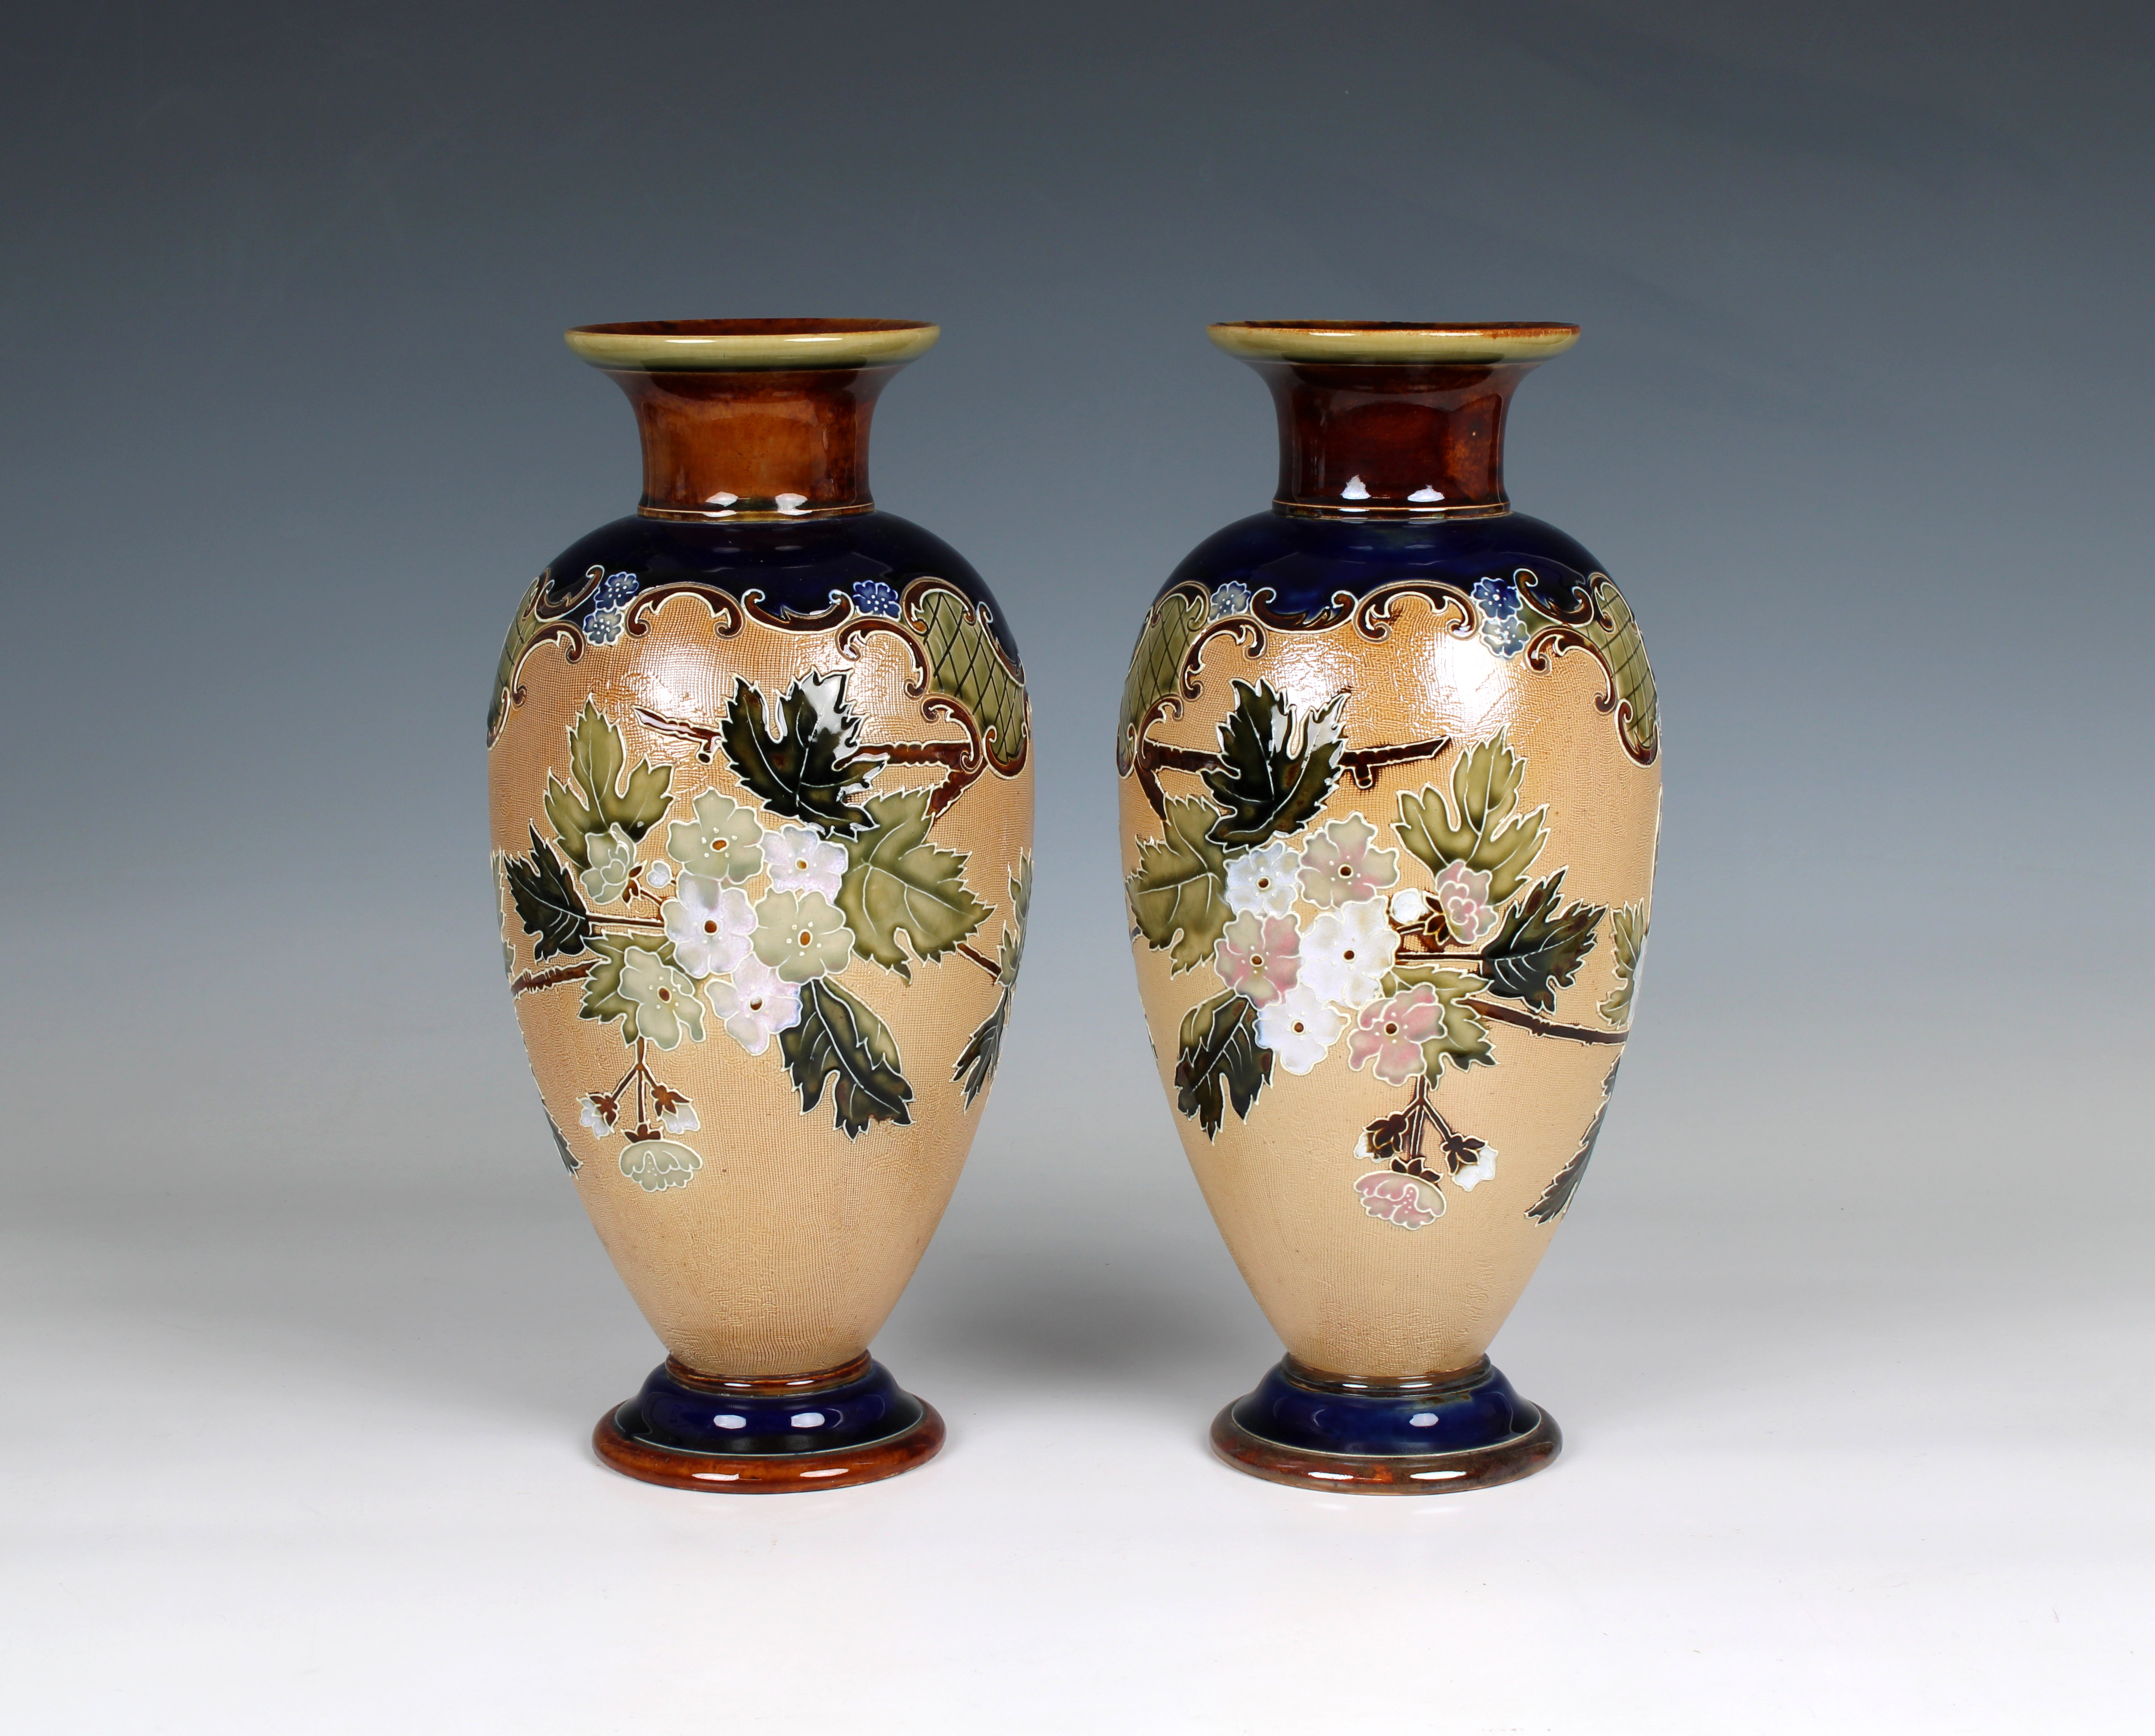 A matched pair of Doulton Lambeth Slater's Patent vases - Image 2 of 4